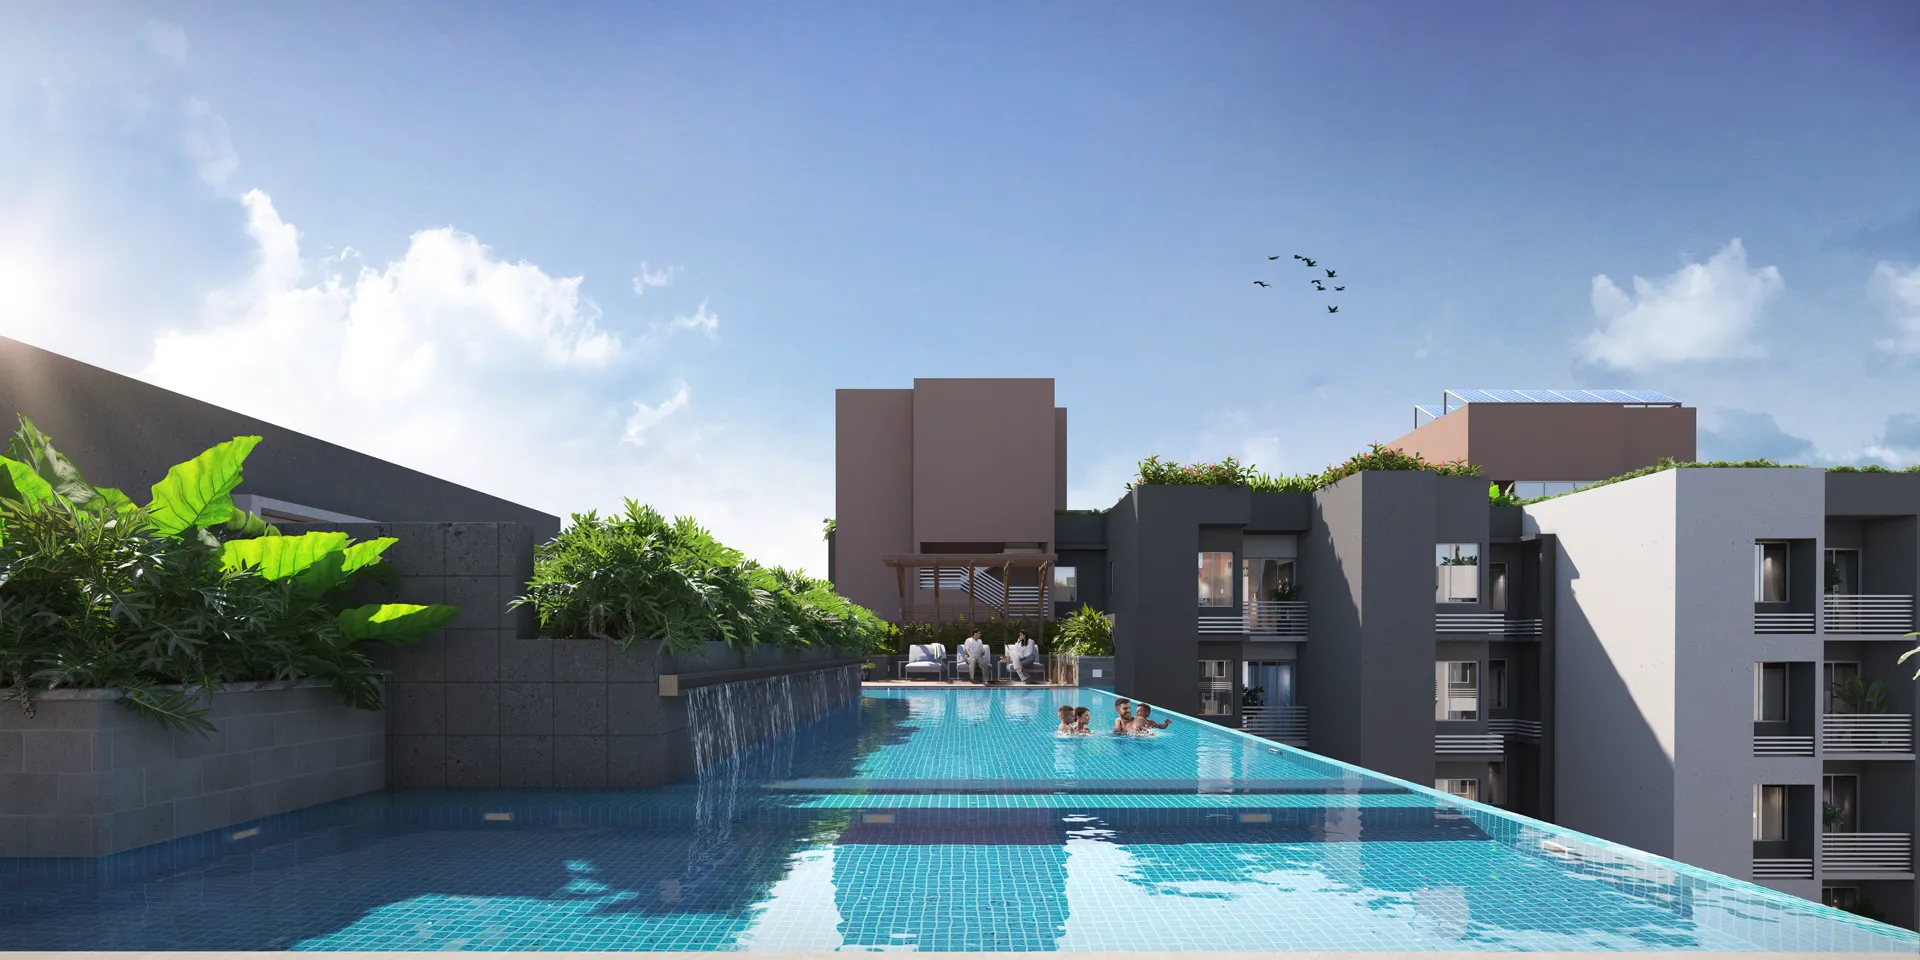 Luxury Flats in kolkata with rooftop swimming pool